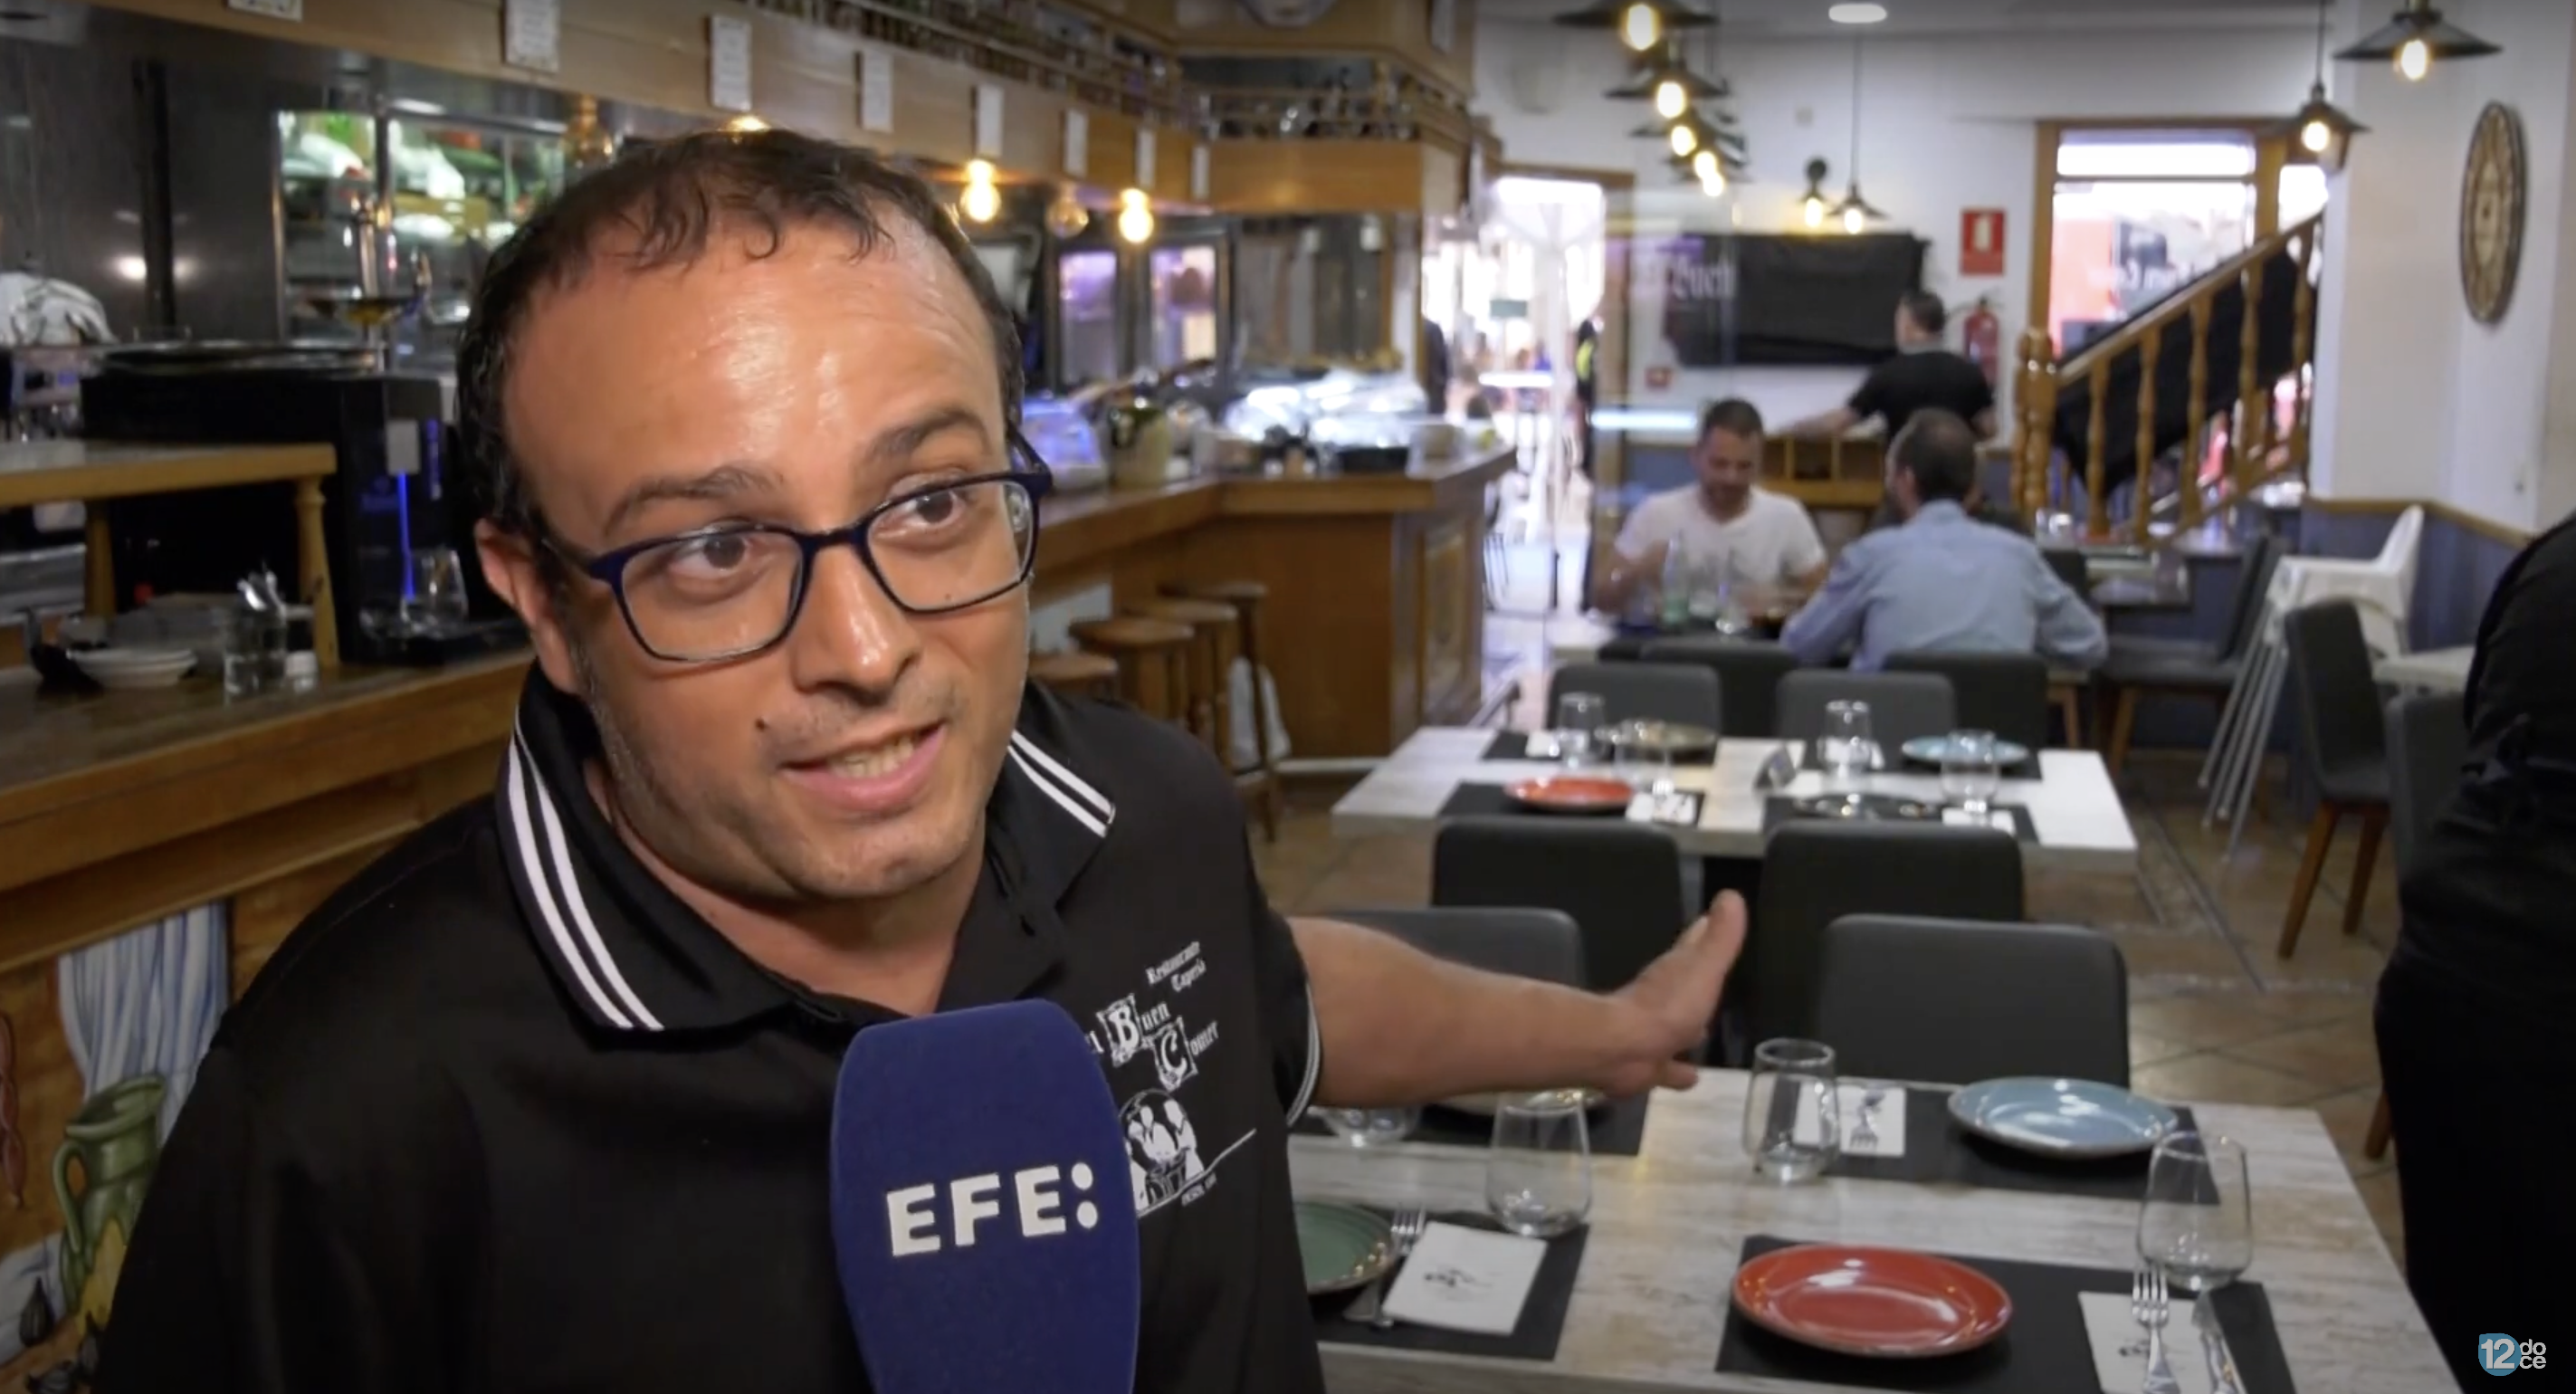 Moisés Doménech, owner of the restaurant El Buen Comer, speaking about the dine-and-dash expat in a video dated September 21, 2023 | Source: youtube.com/12tv_es